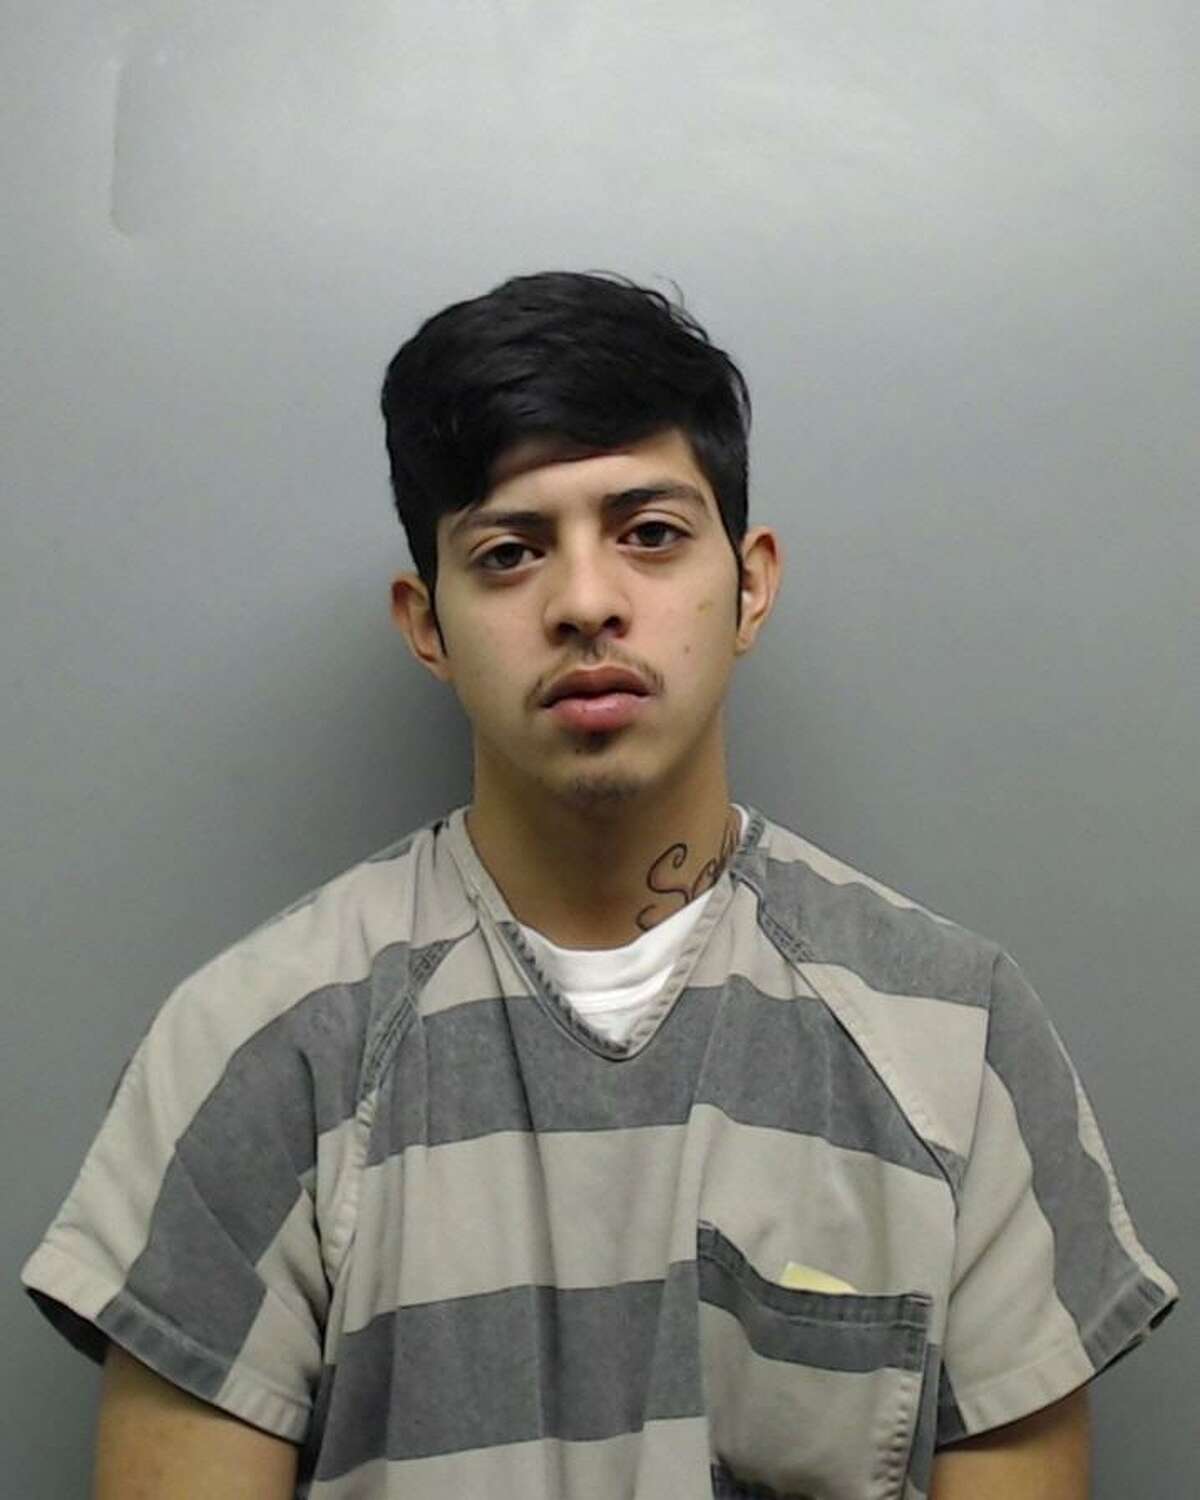 21 Year Old Man Arrested In Central Laredo Fatal Shooting Case